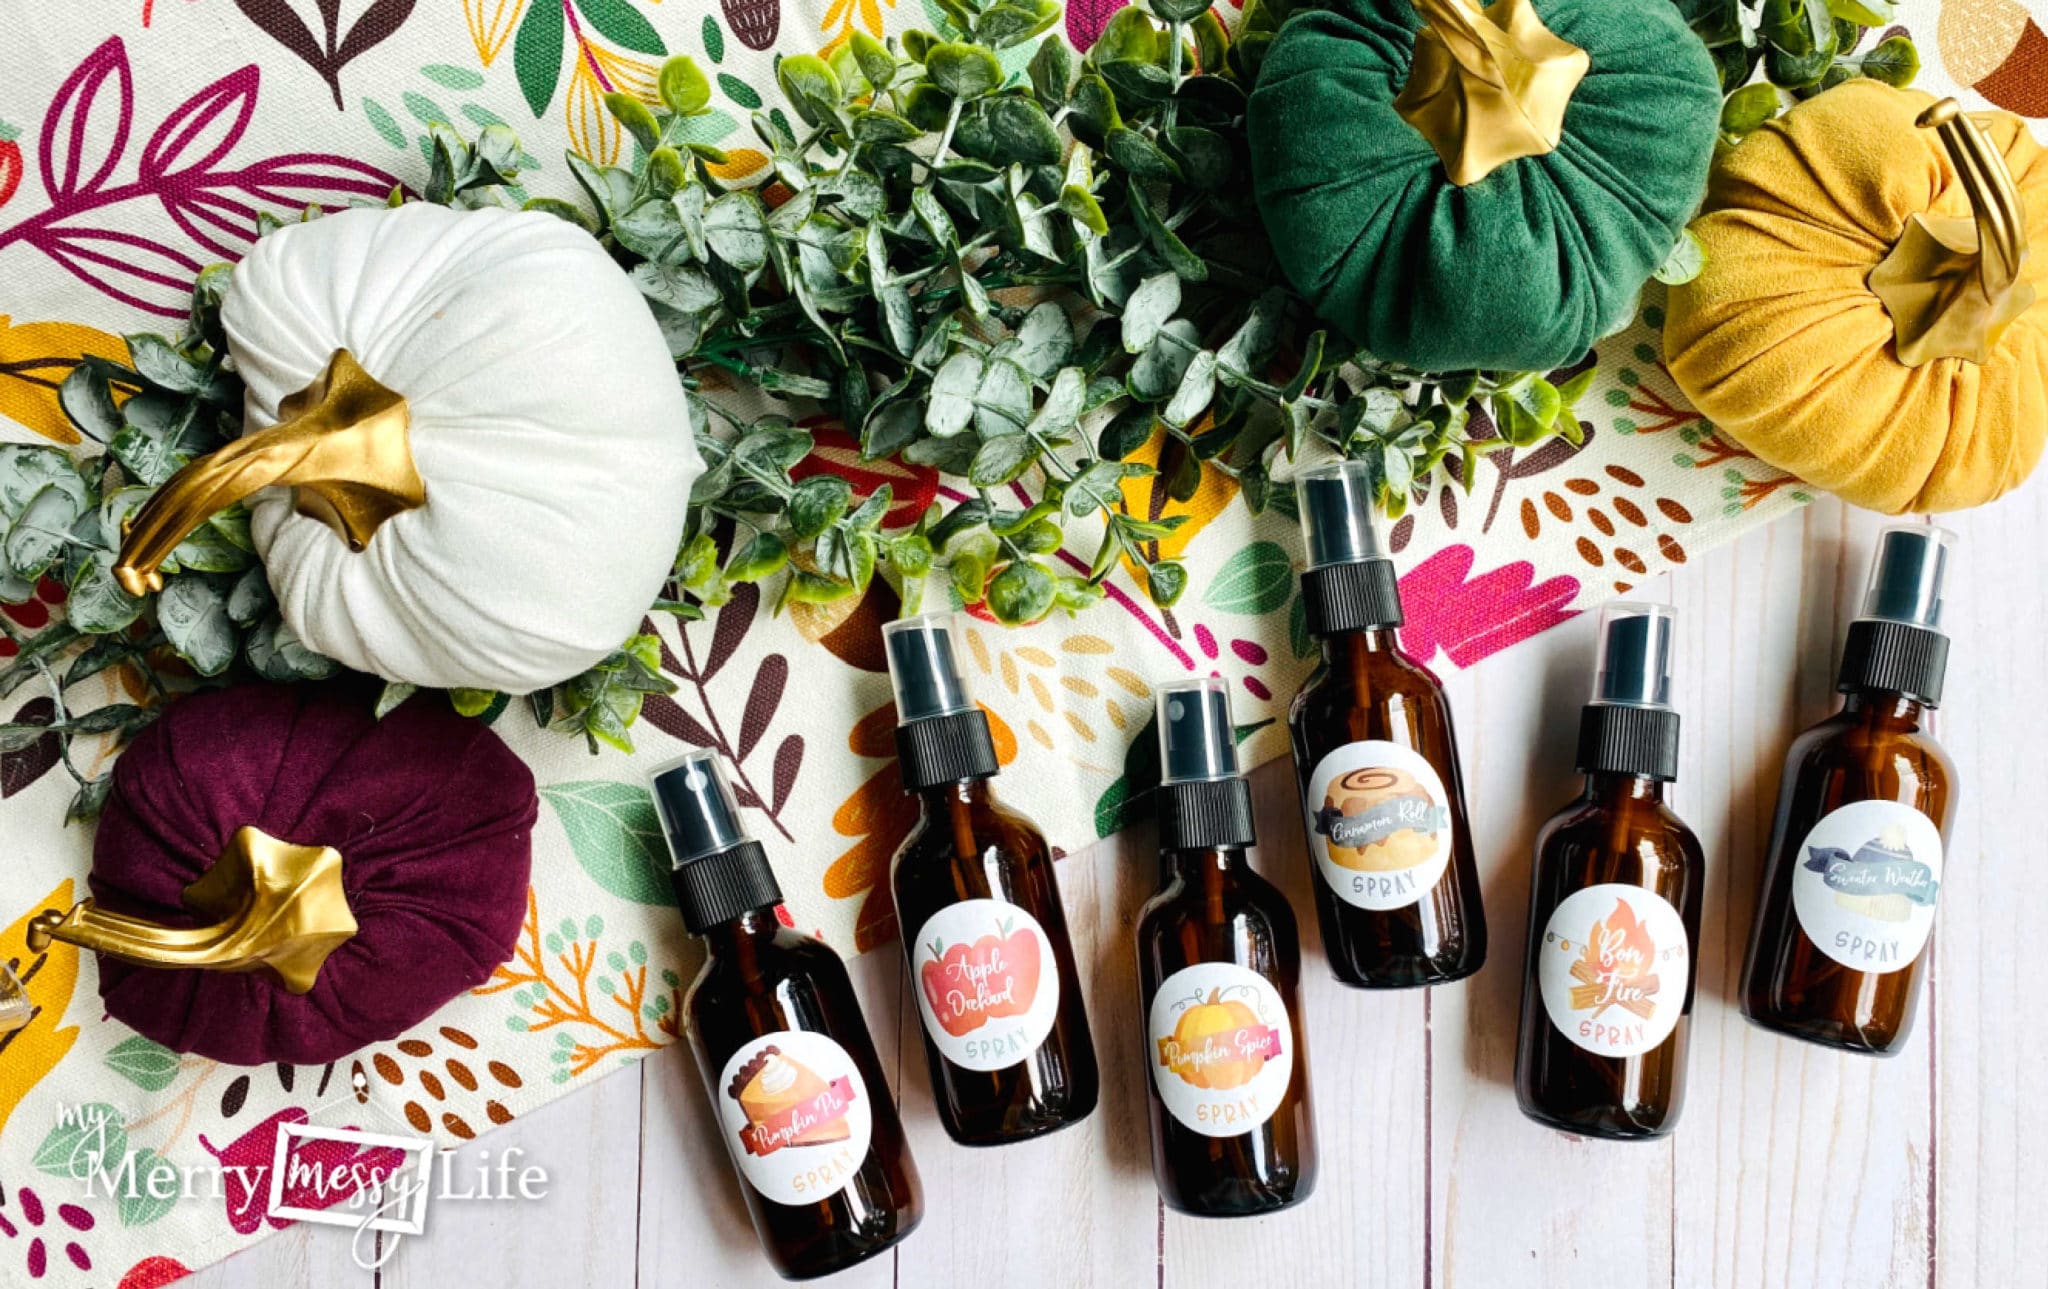 Fall Spray Bottle Recipes - Pumpkin Spice, Apple Orchard, Pumpkin Pie, Bon Fire, Cinnamon Roll and Sweater Weather using essential oils like cinnamon, clove, orange, ginger, and more!